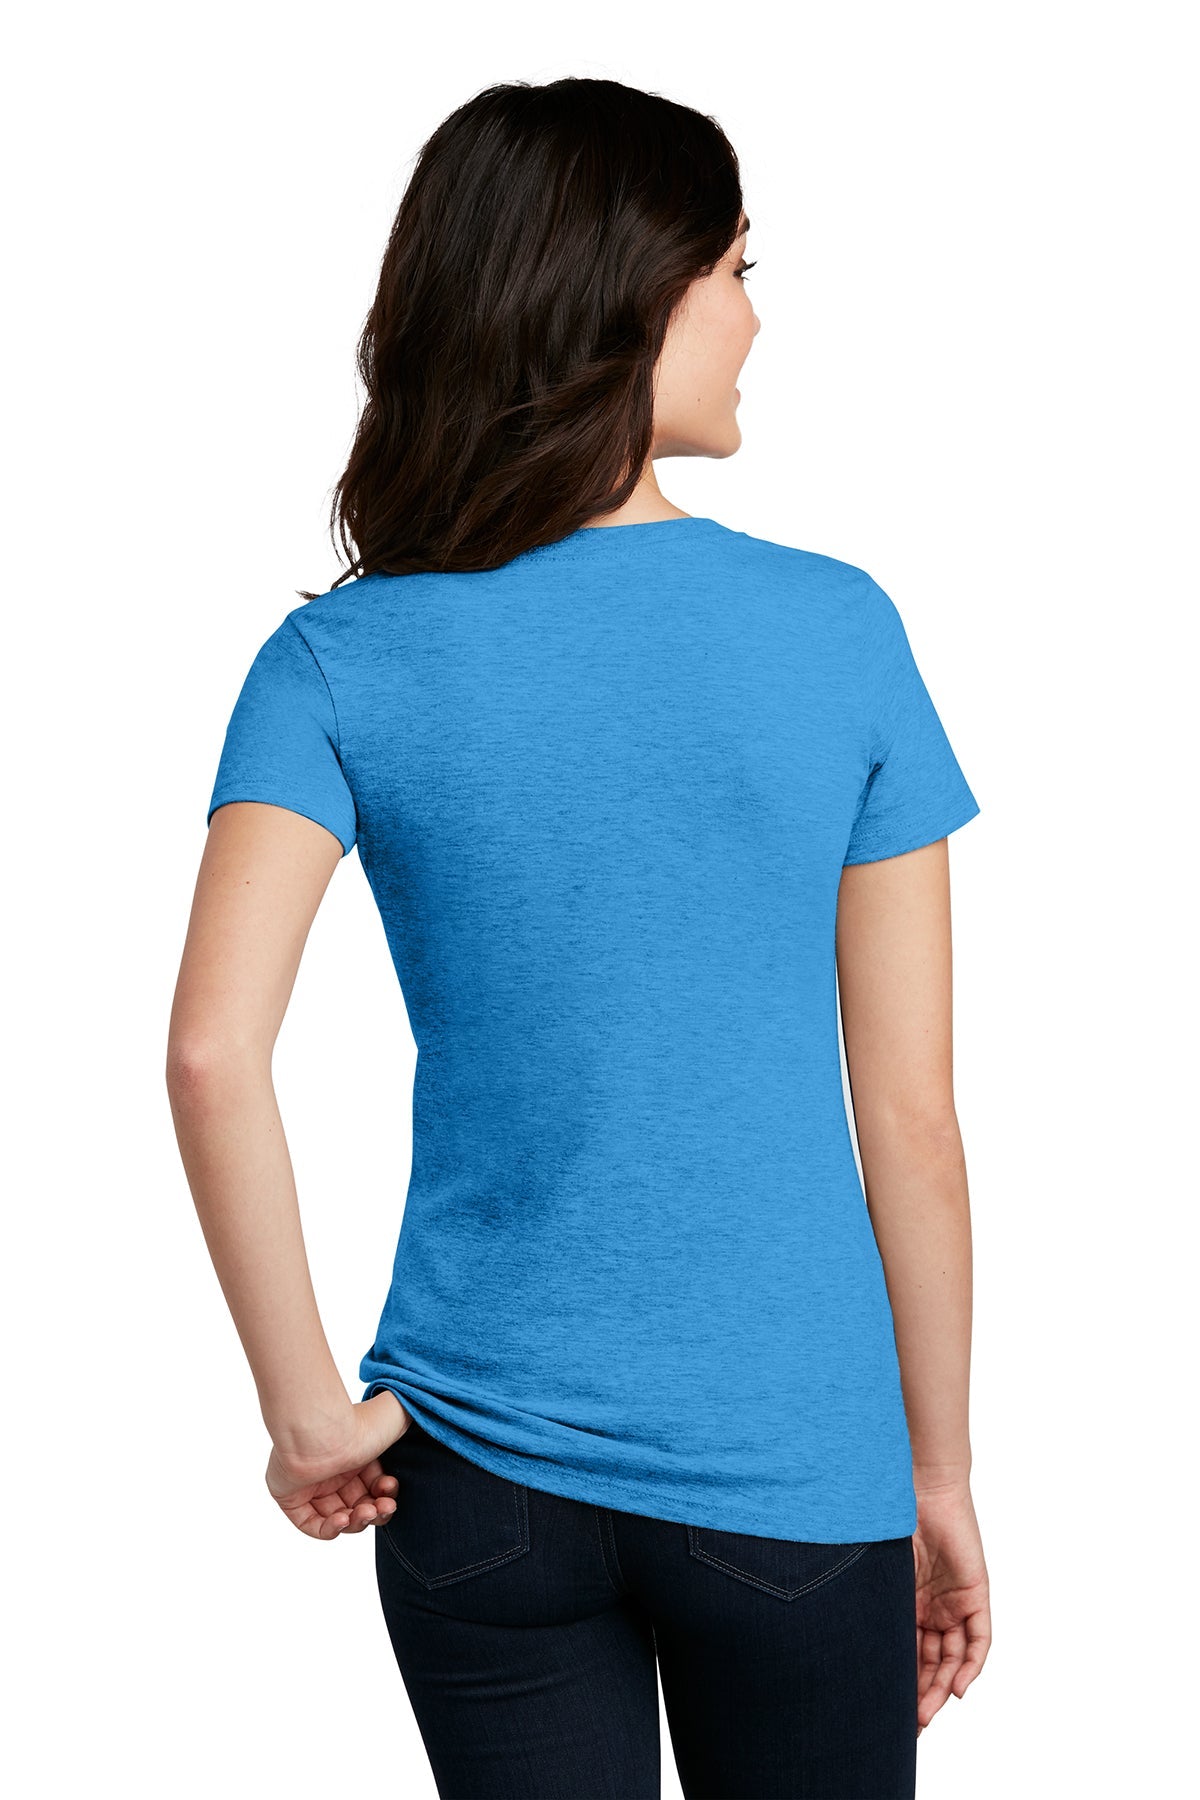 District Made Ladies Perfect Blend V-Necks, Heathered Bright Turquoise